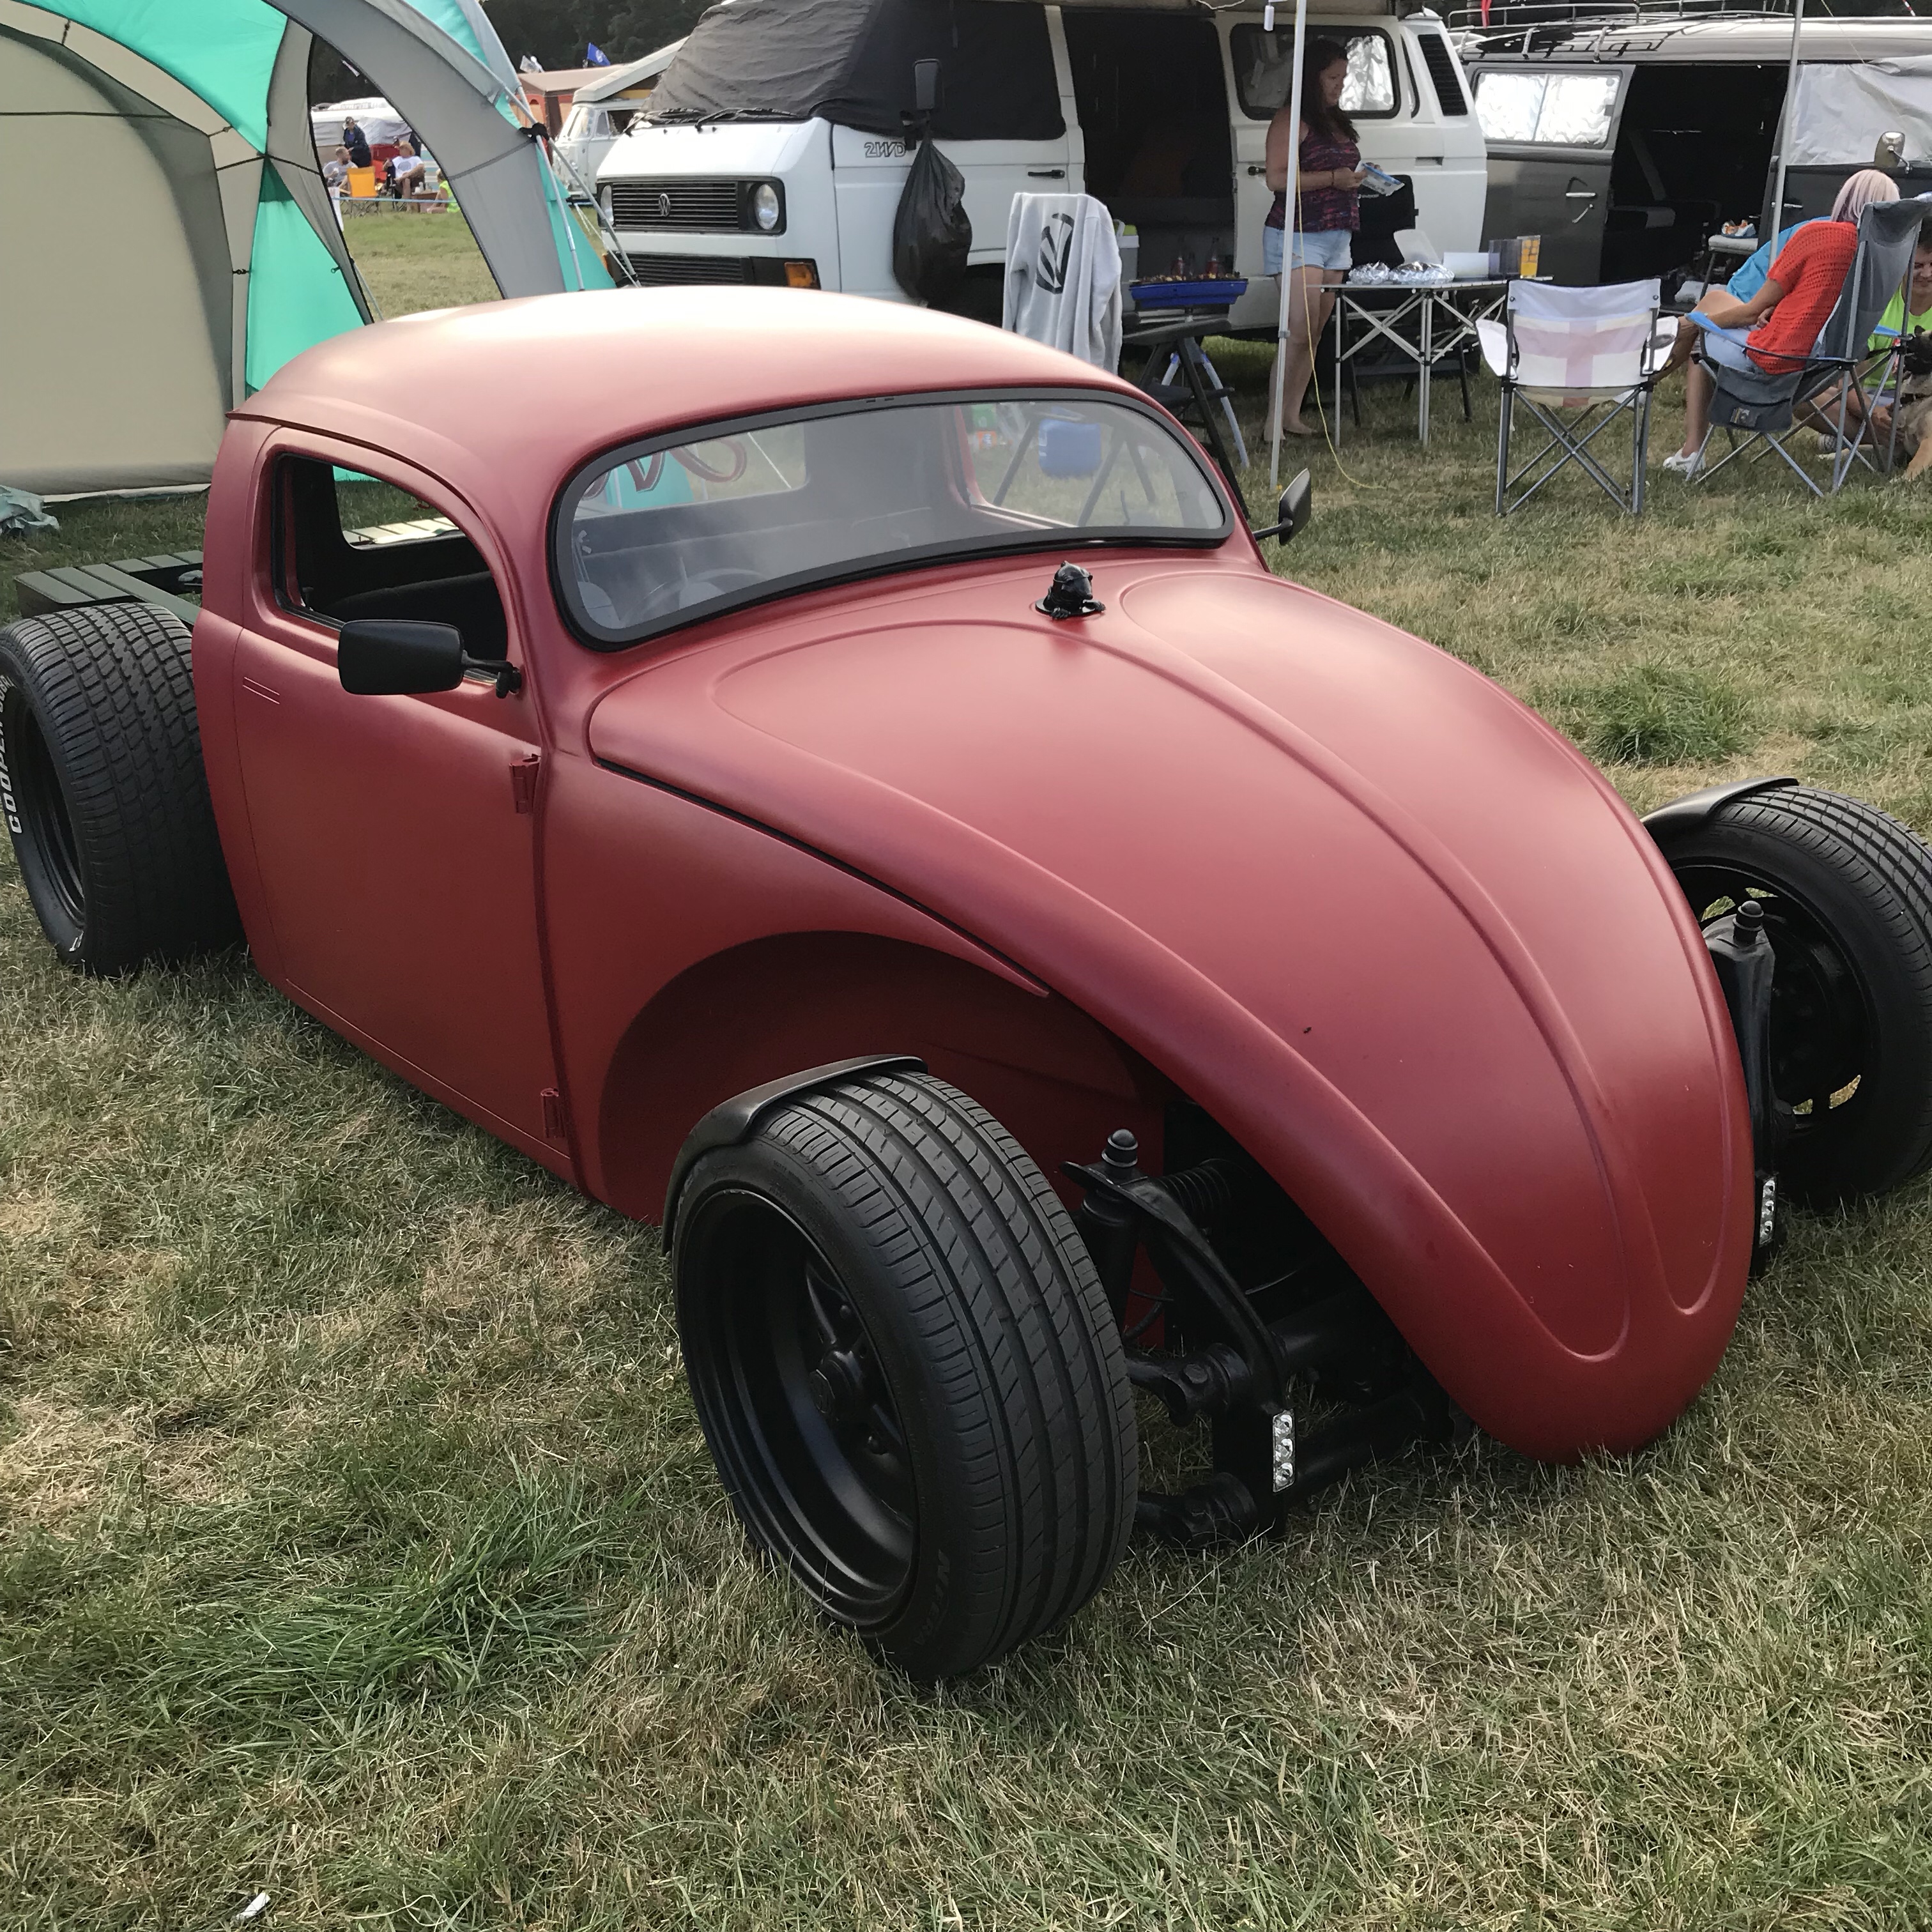 Red volksrod, open wheeled, flat bed with engine showing. VW Hotrod.